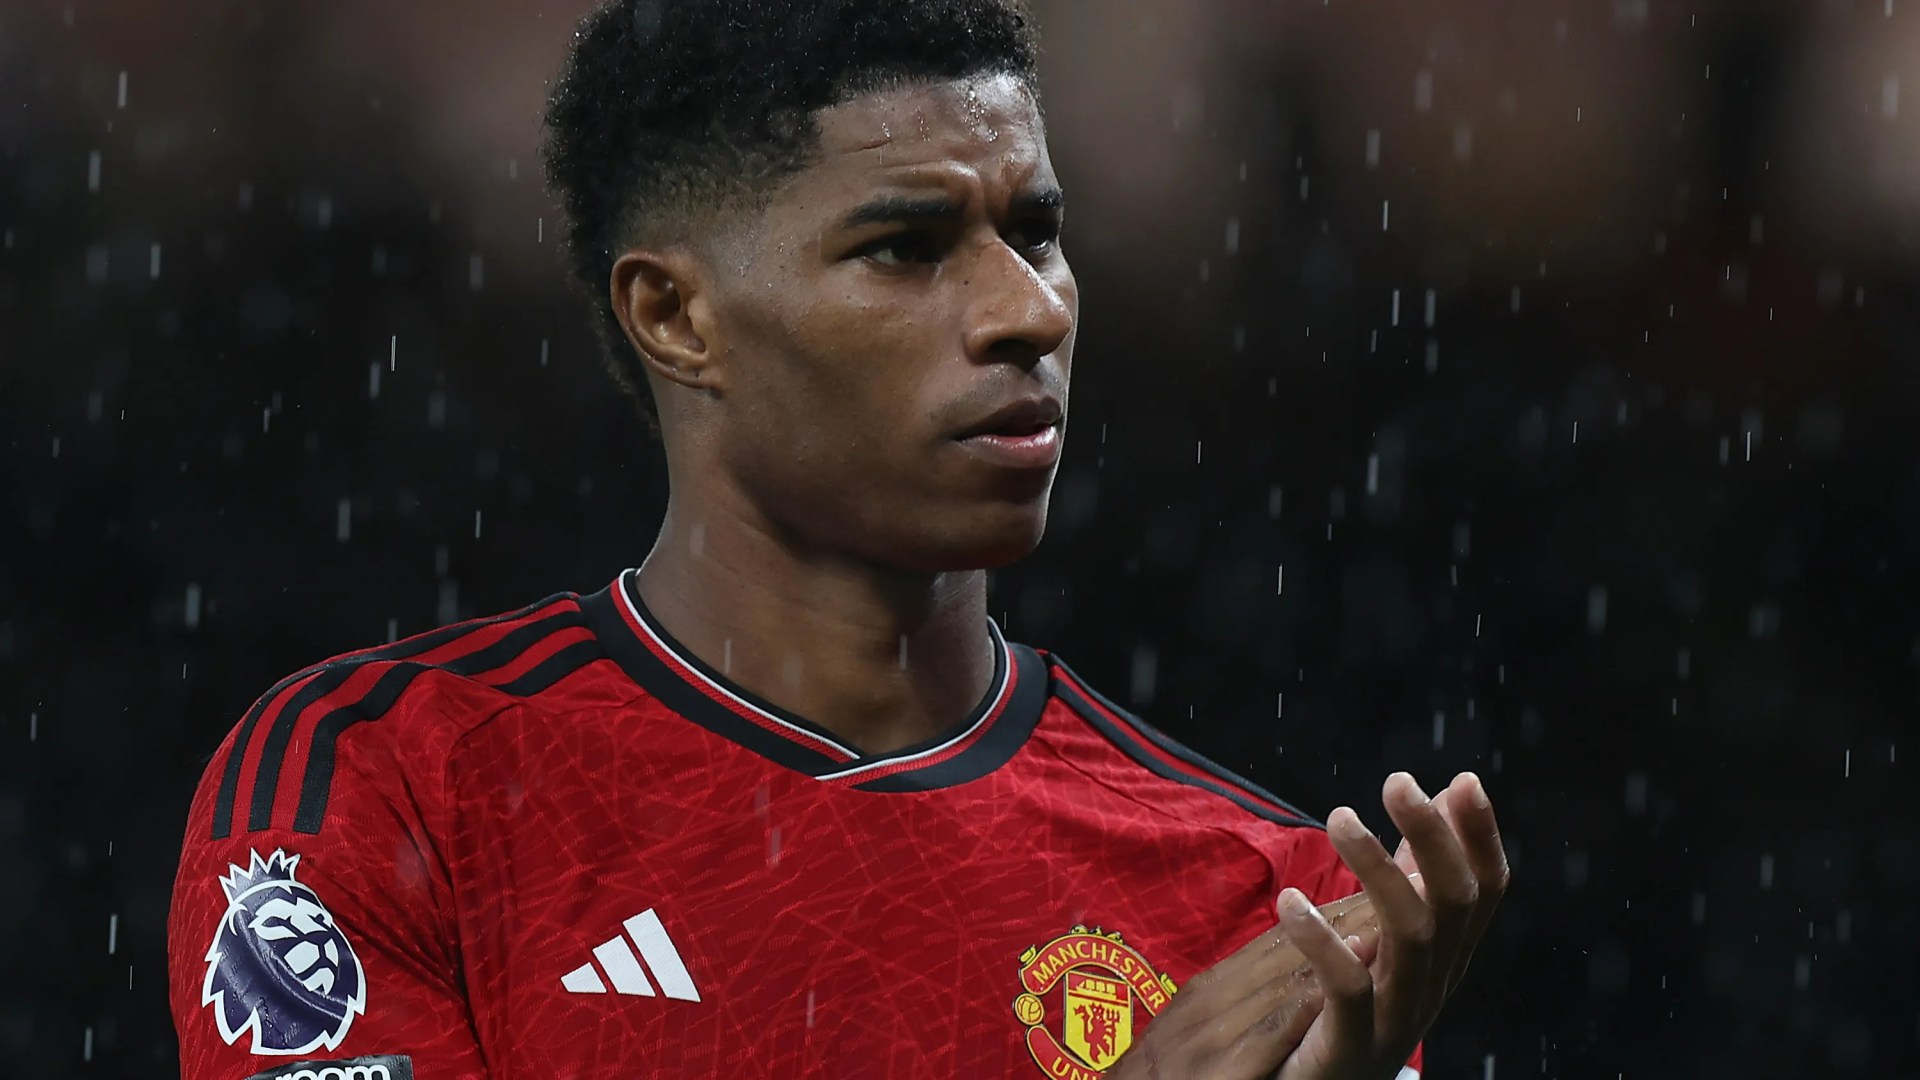 Jamie O'Hara criticises Marcus Rashford's 'mentality' amid reports of night out hours after Man United's defeat to Man City